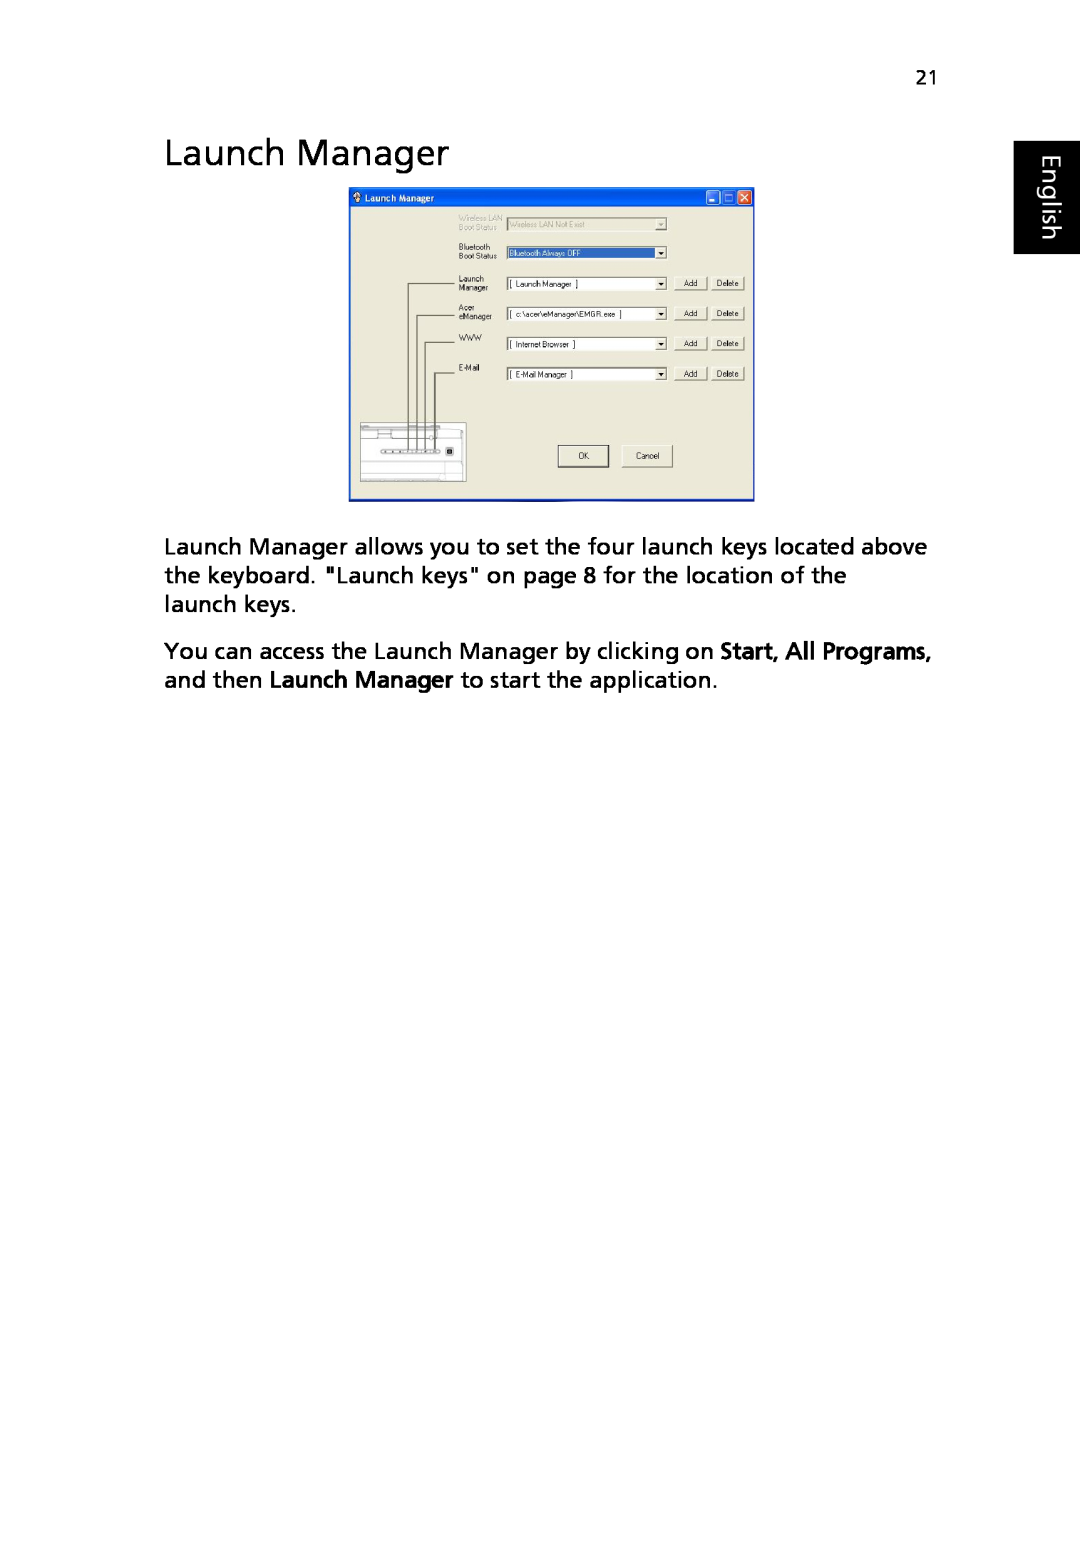 Acer 2310 Series manual Launch Manager, English 